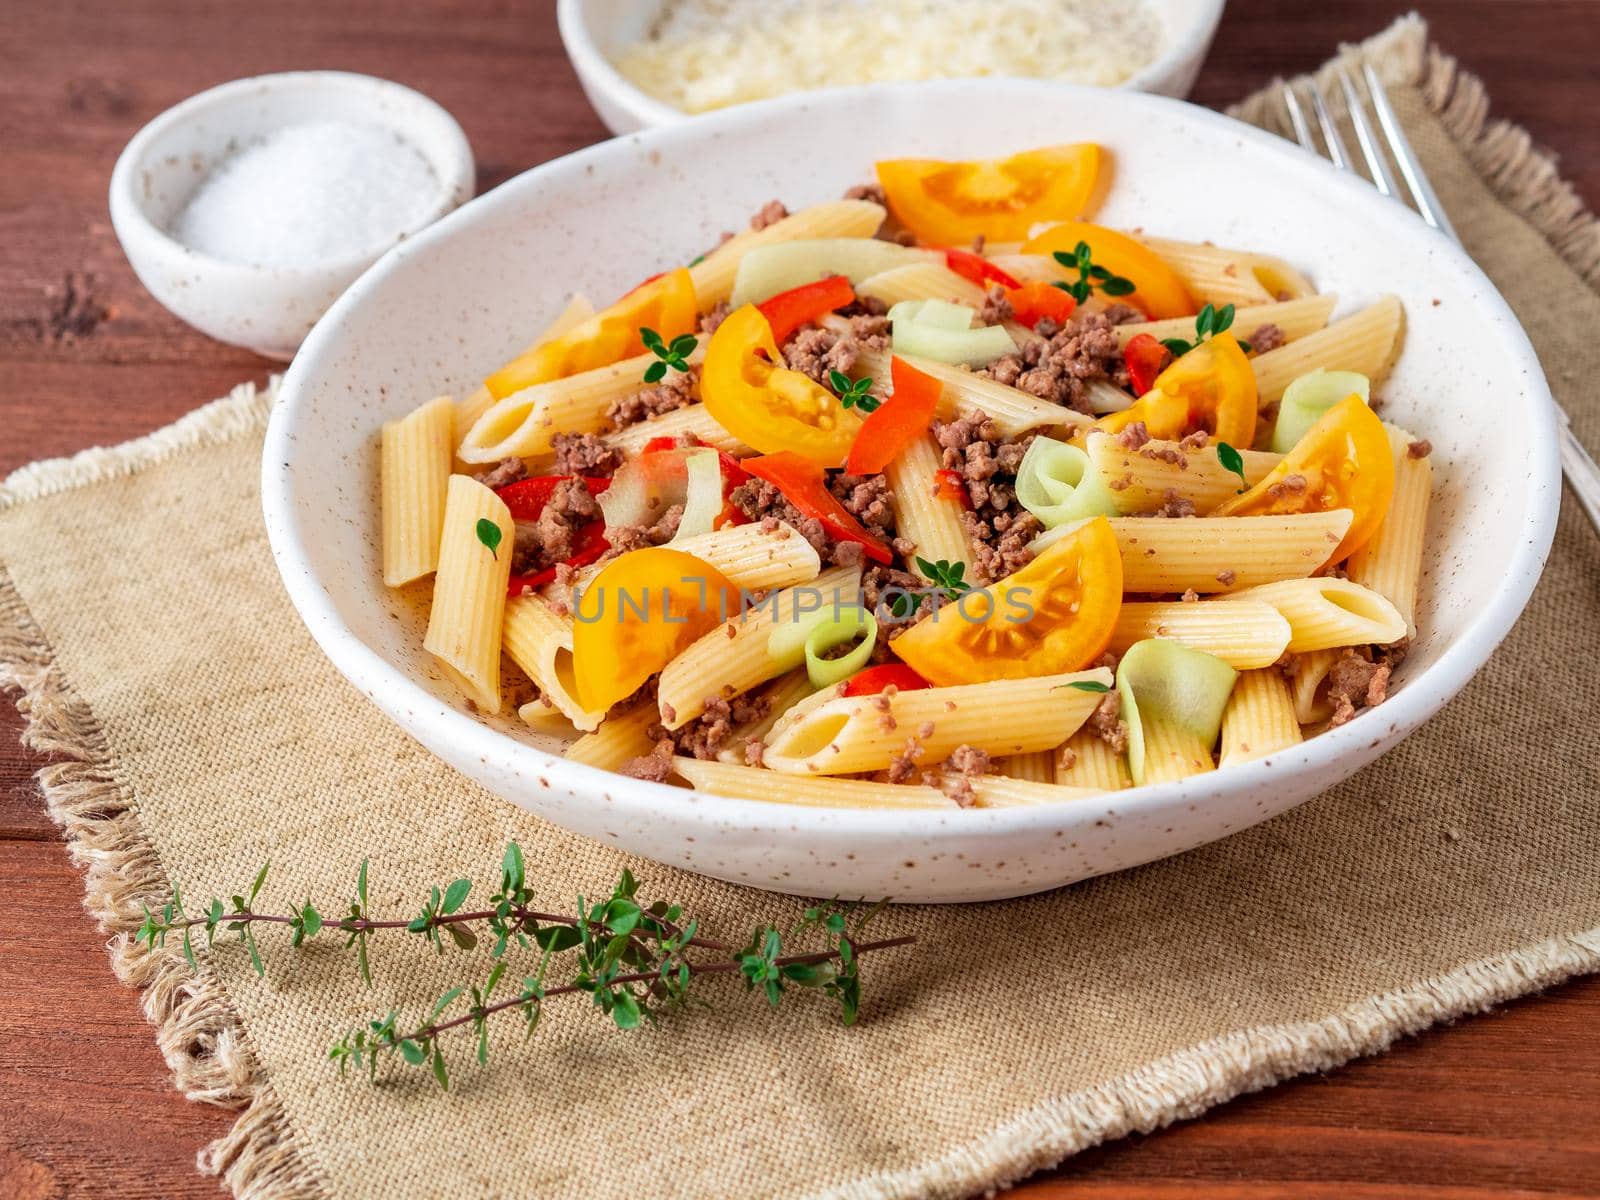 Penne pasta with yellow tomatoes, red and green vegetables, mincemeat on dark wooden background, side view.